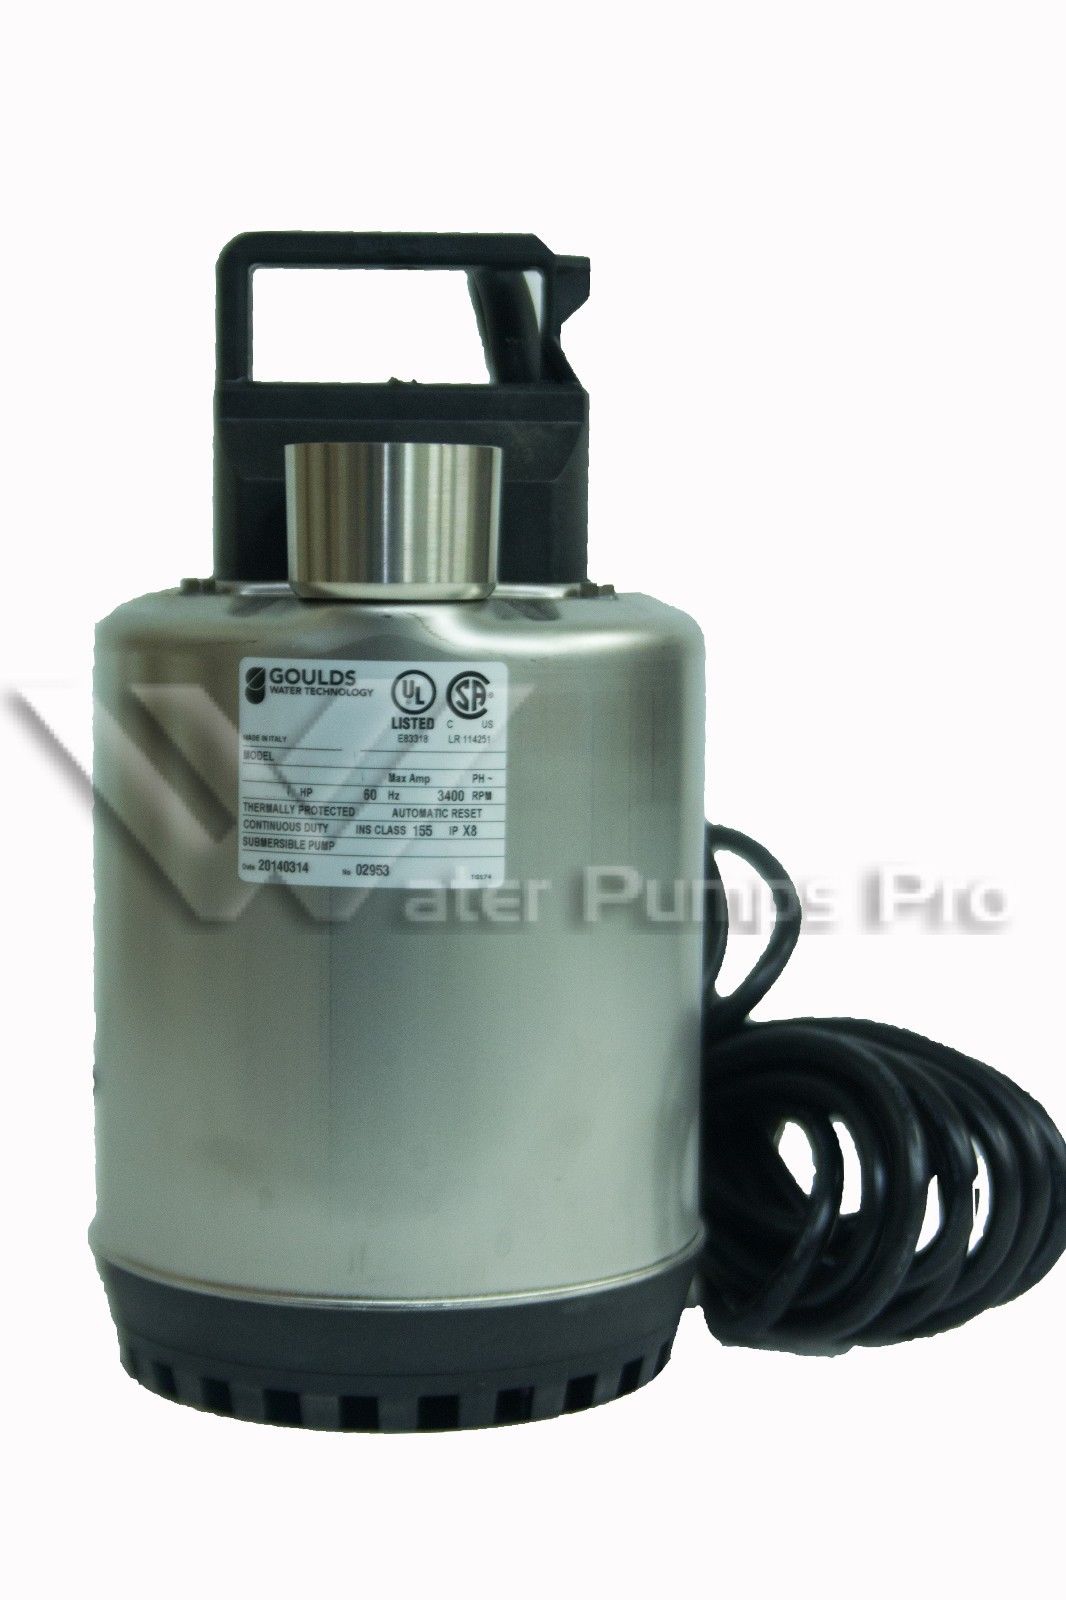 Goulds LSP0311 1/3HP 115V- Submersible Sump Pump